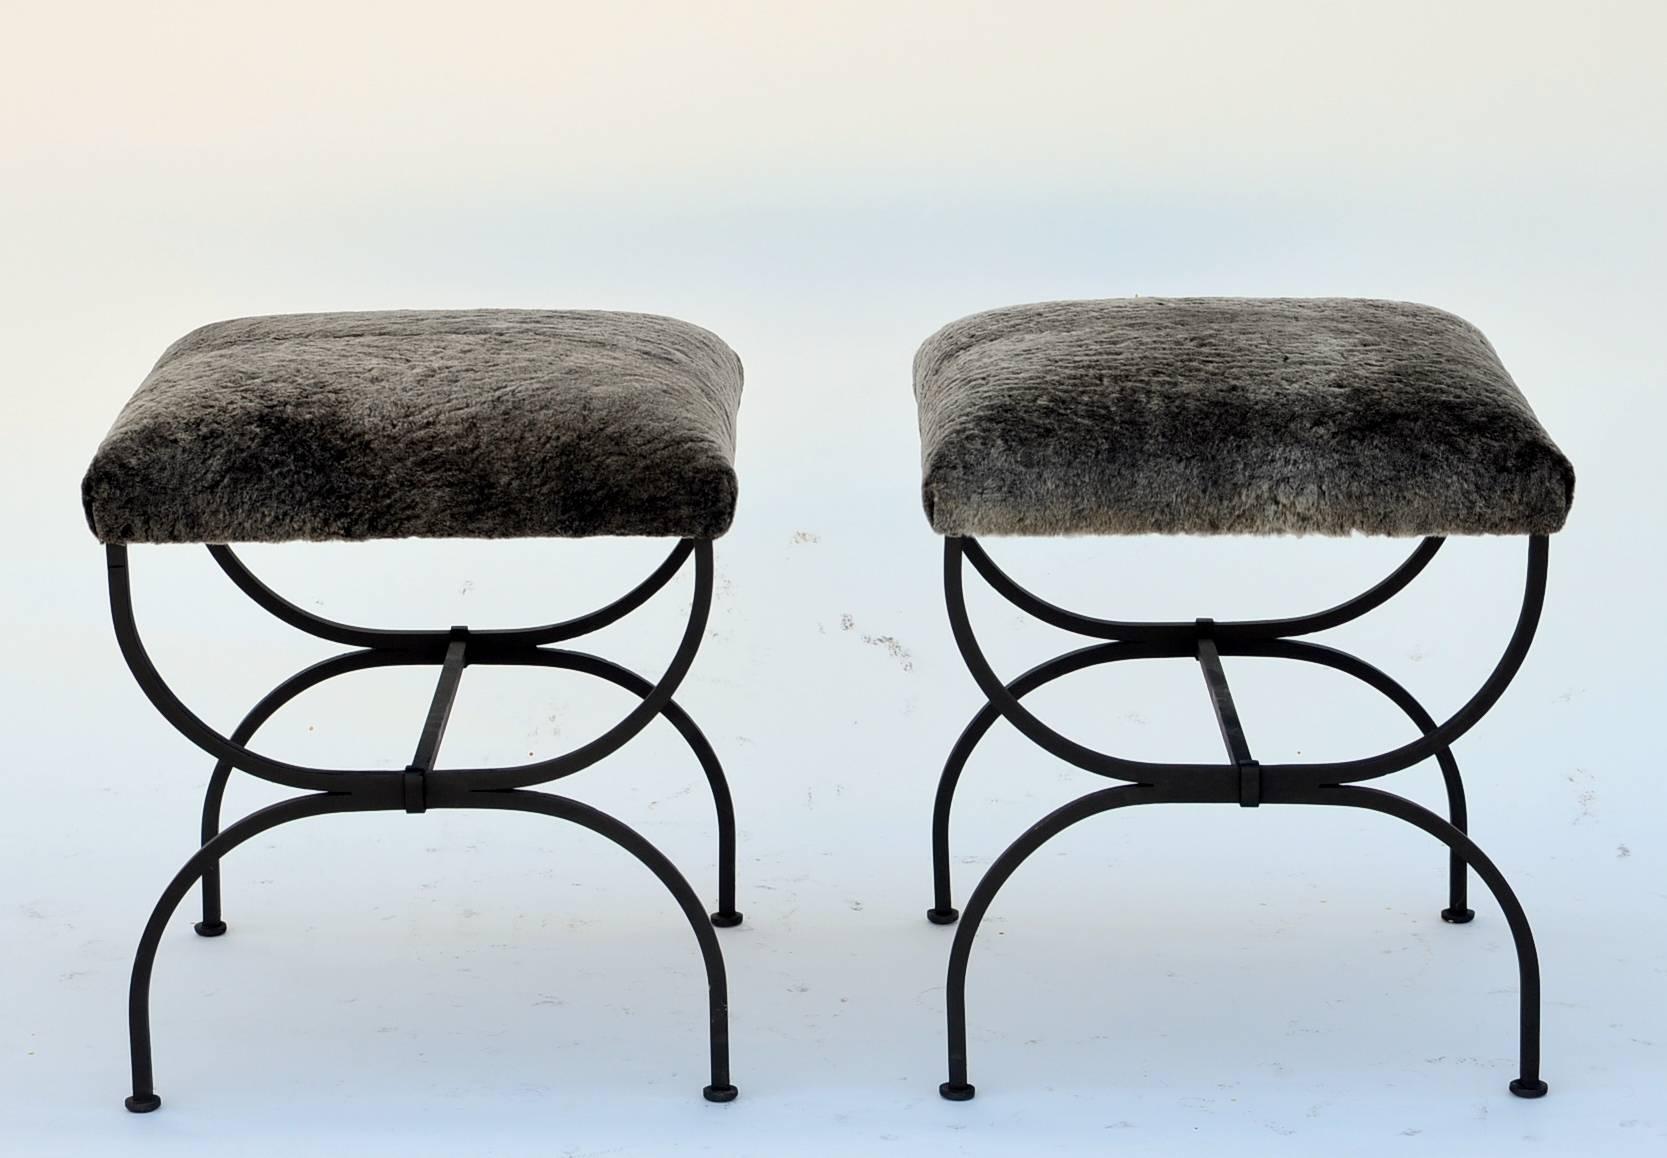 Pair of chic fur-covered wrought iron stools in the style of Gilbert Poillerat. Upholstered firm. Great in front of a coffee table or a fireplace in the living room or at the foot of a bed instead of a bench.